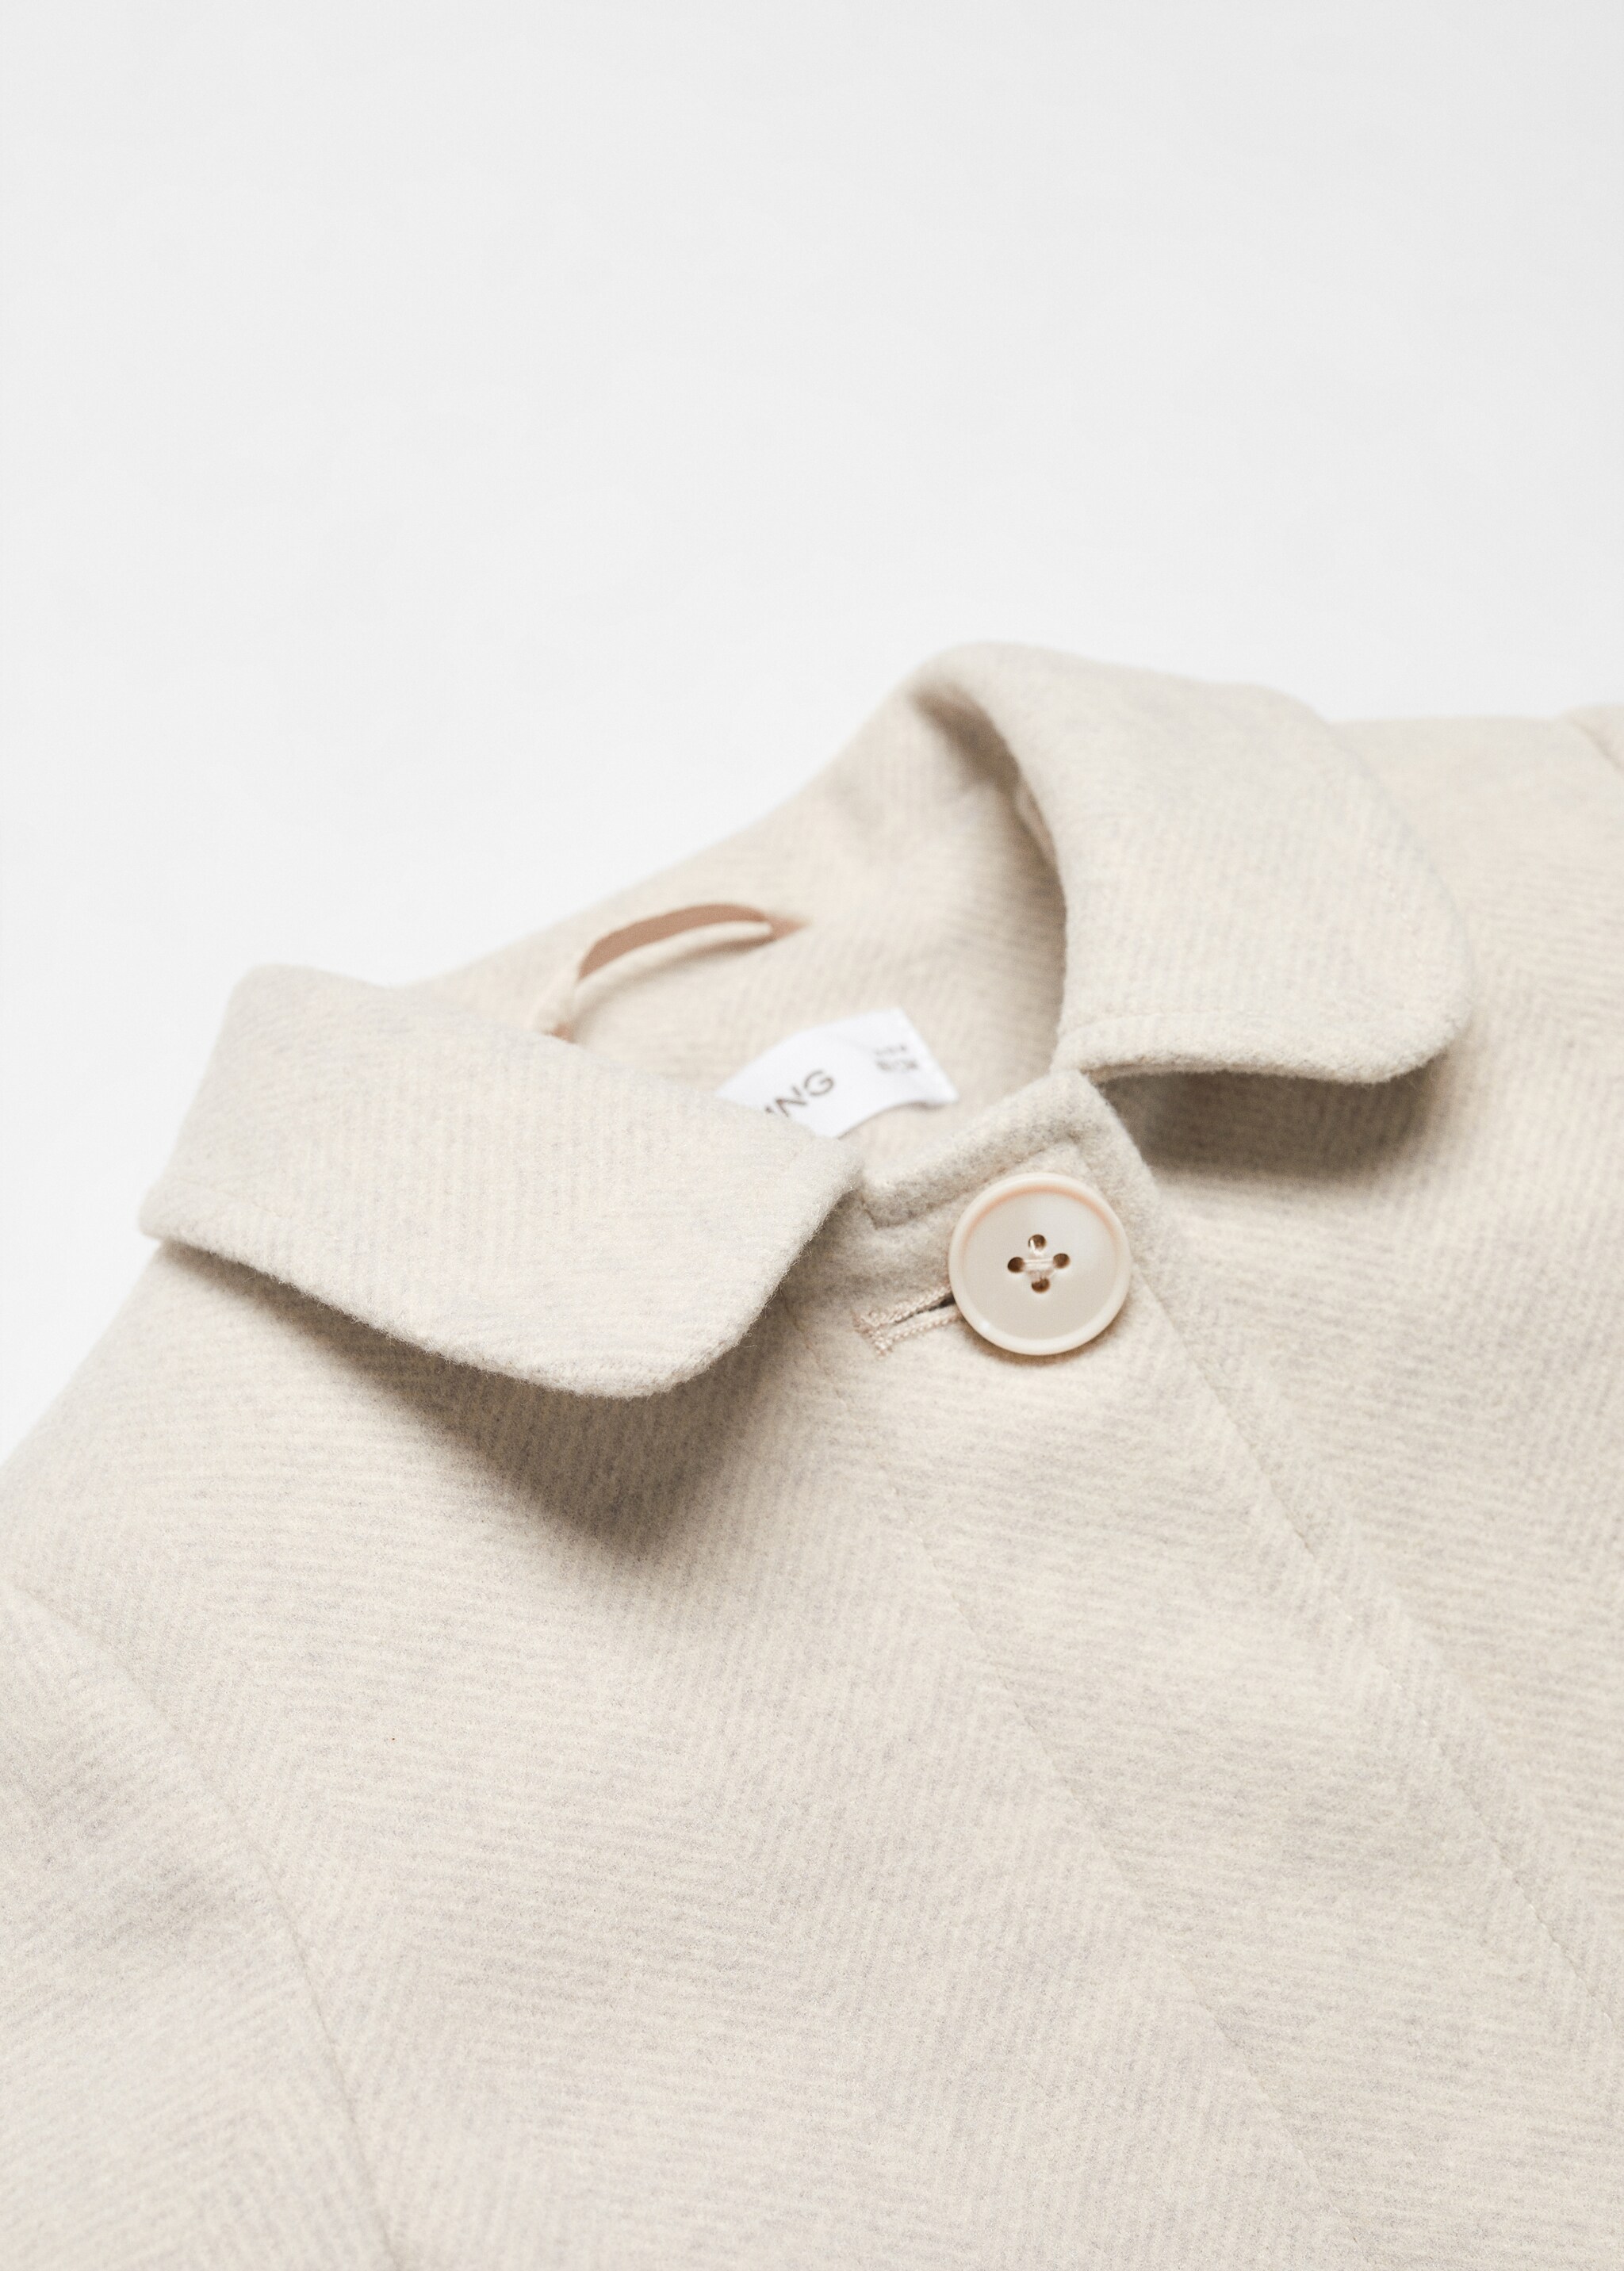 Camp-collar coat - Details of the article 8